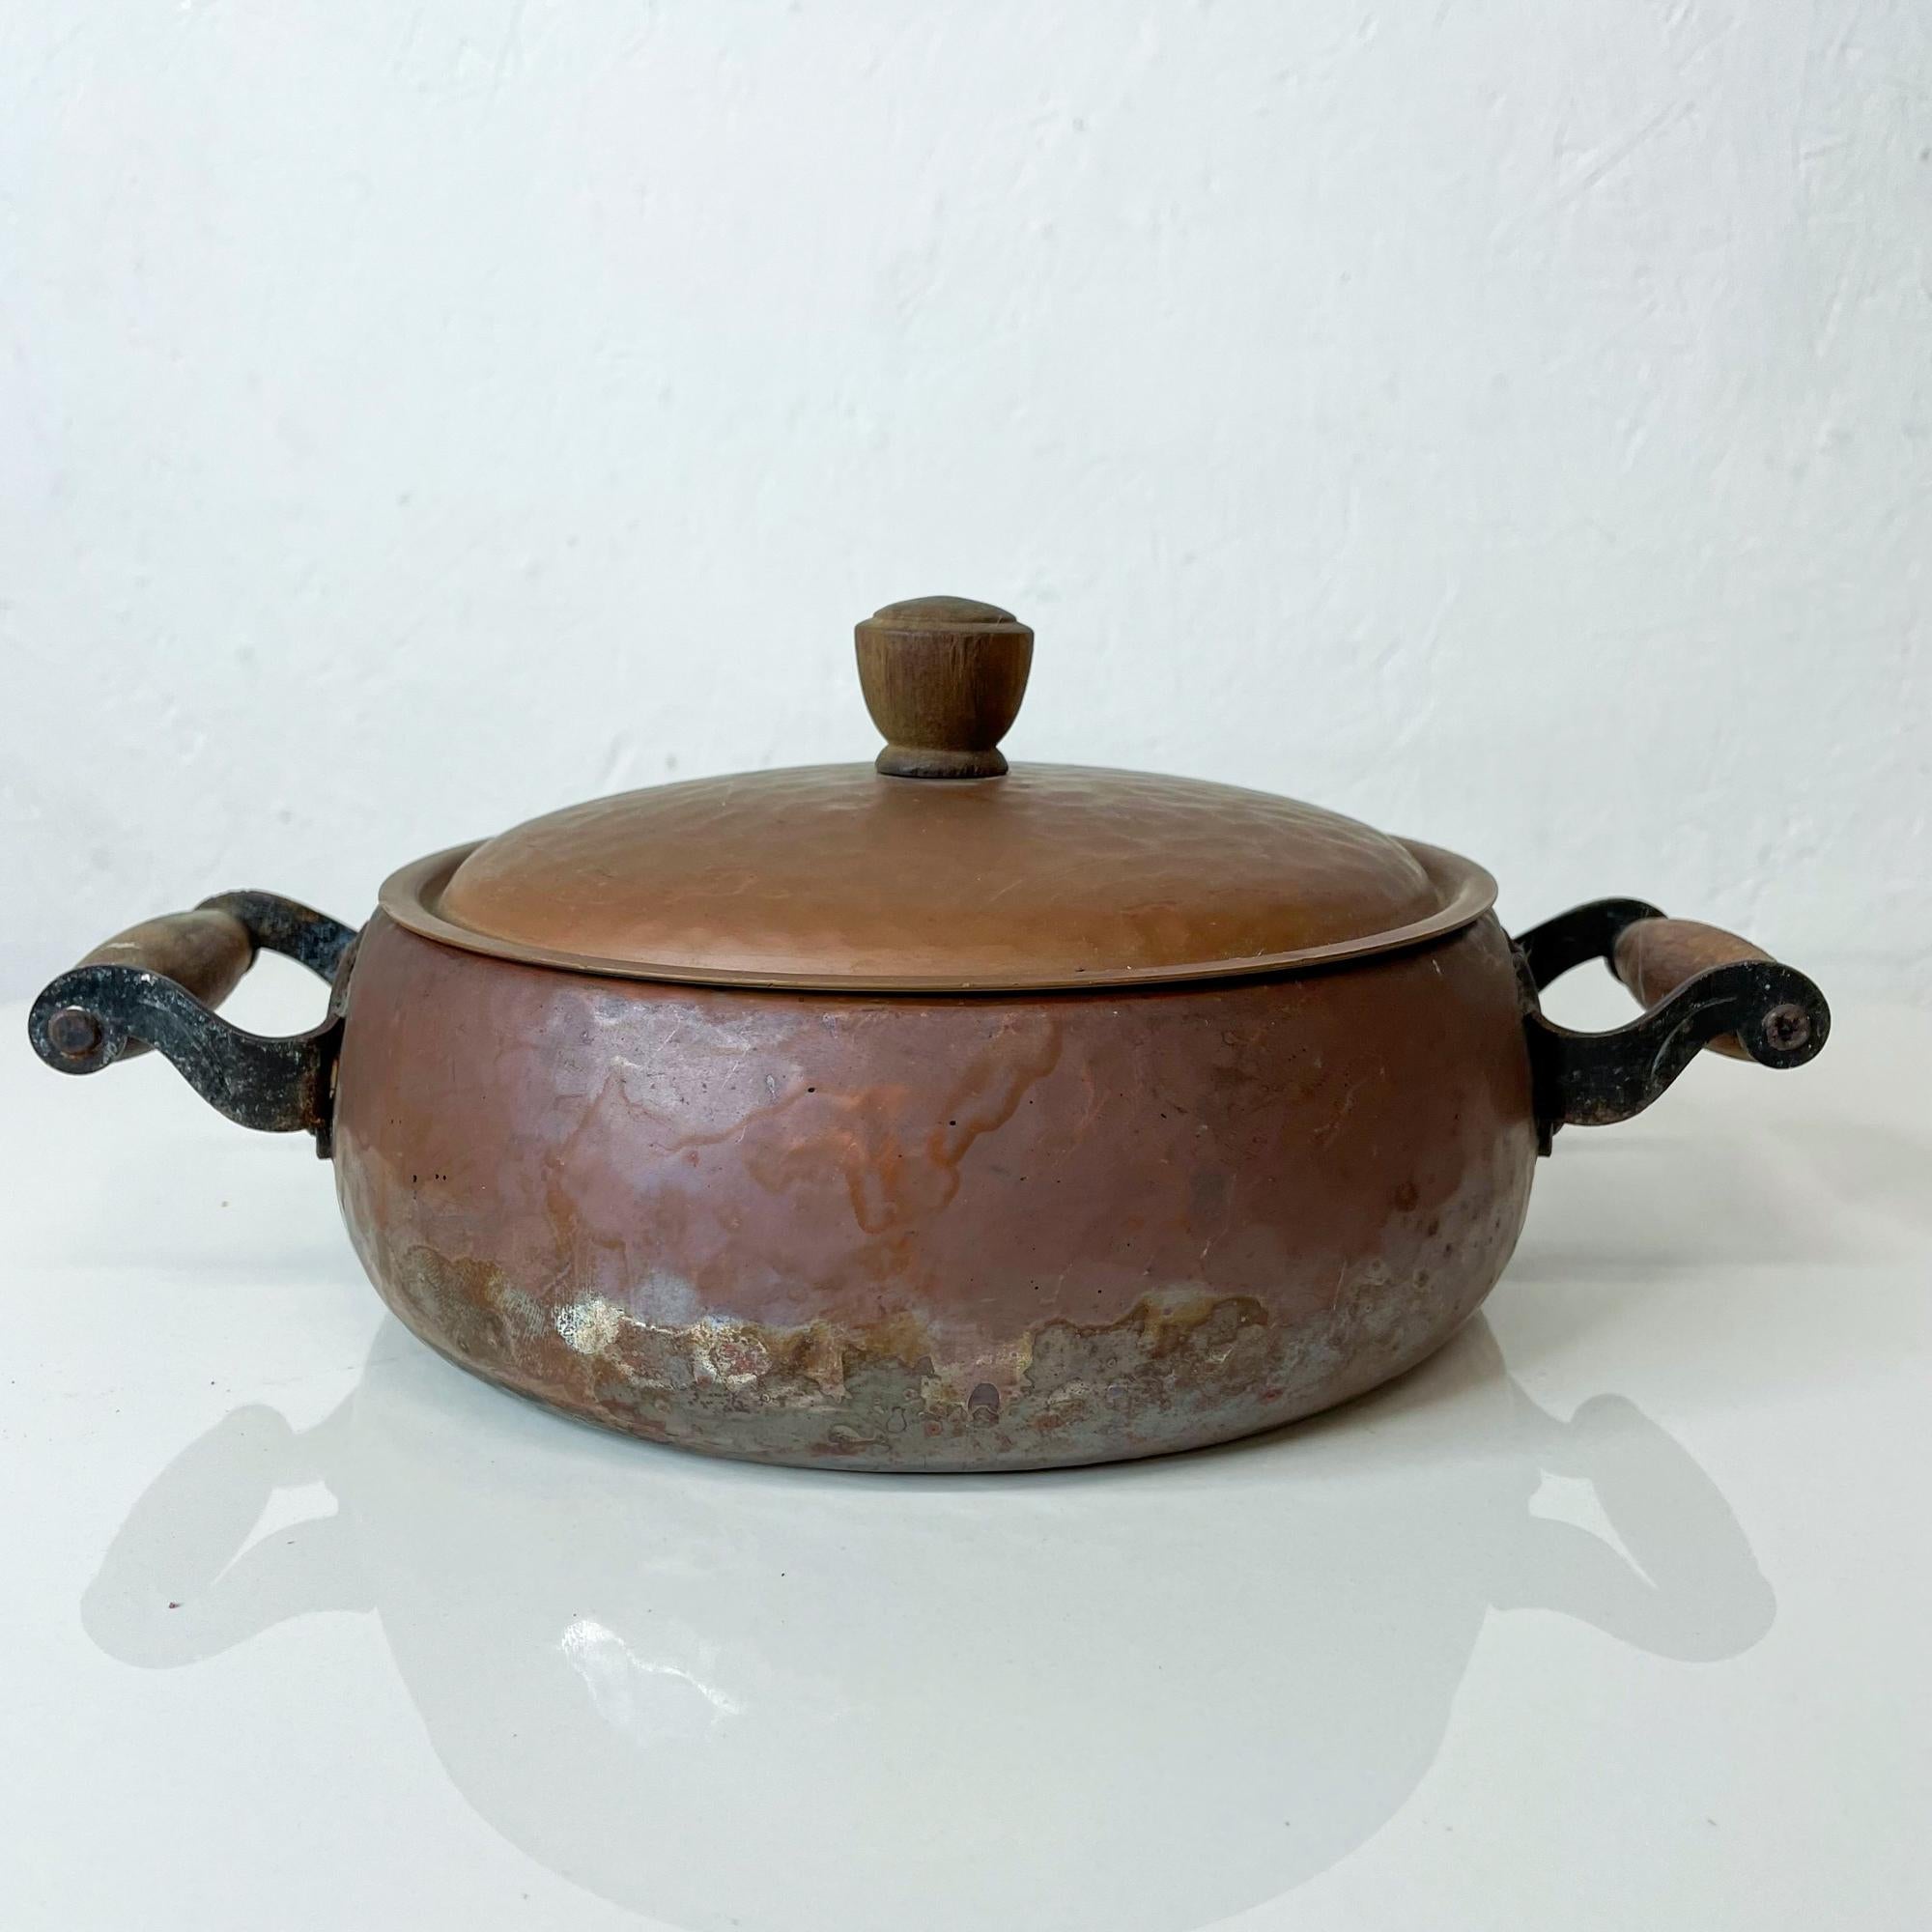 Swiss made Stockli Netstal Vintage Hammered Copper Casserole Dutch Oven Pot with Cover Lid
Vintage copper pot with sculptural wood handles
Made in Switzerland Stamped by maker
Measures: 11 Width x 7.75 diameter x 4 tall inches
Item used with